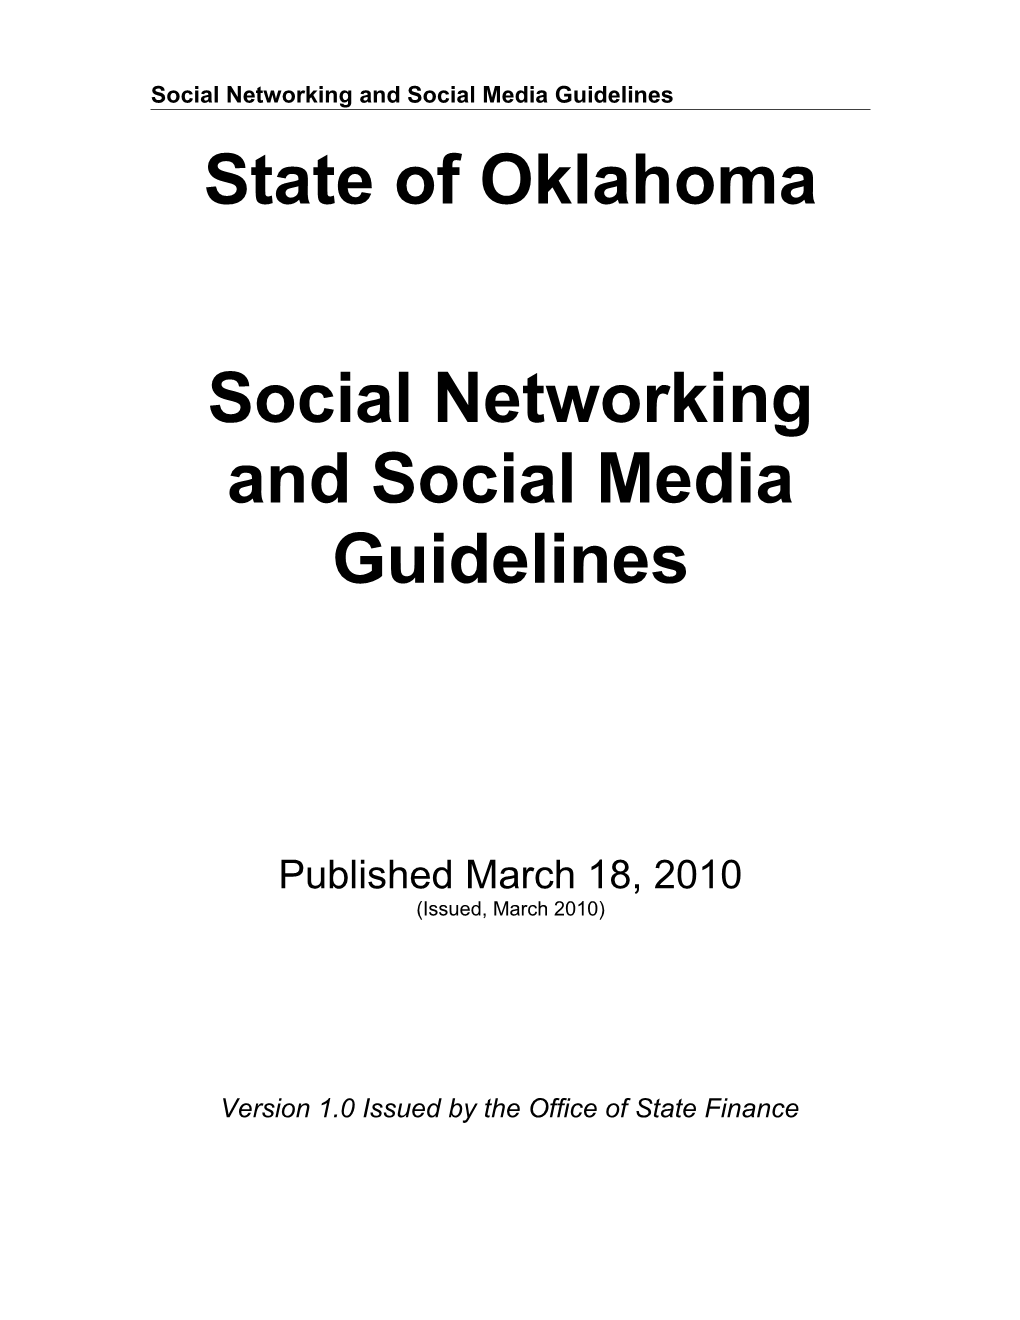 State of Oklahoma Social Networking and Social Media Guidelines